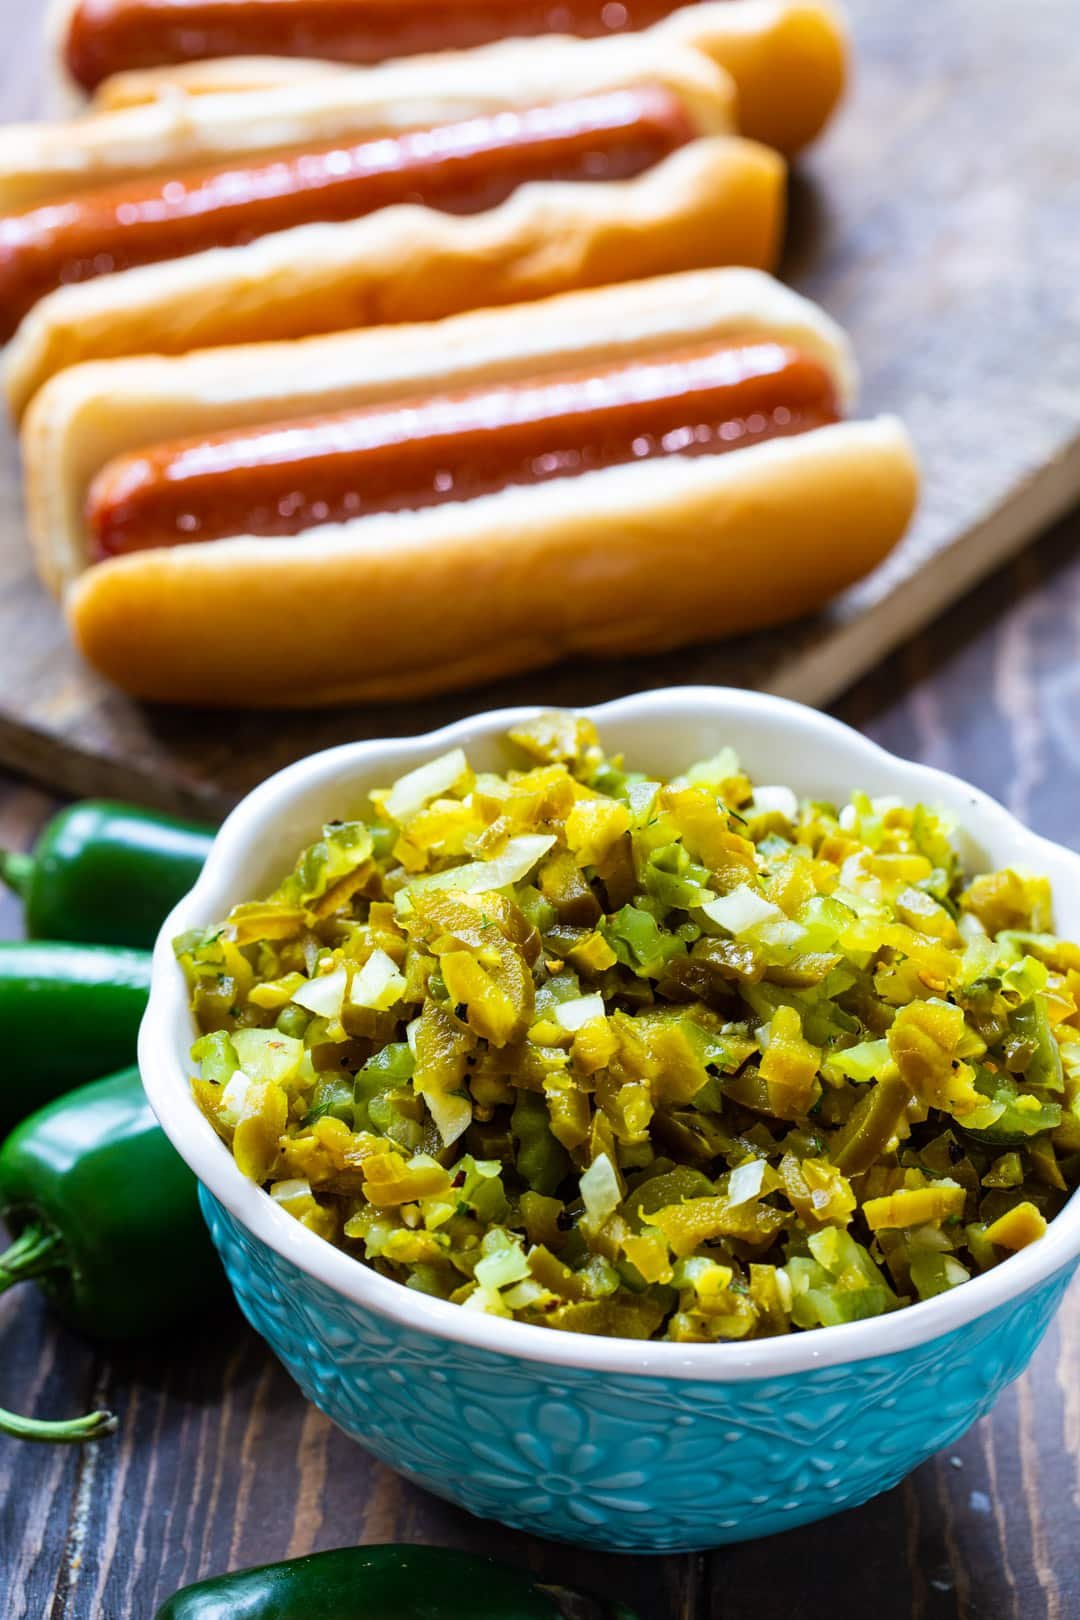 Relish in a bowl and hot dogs in background.